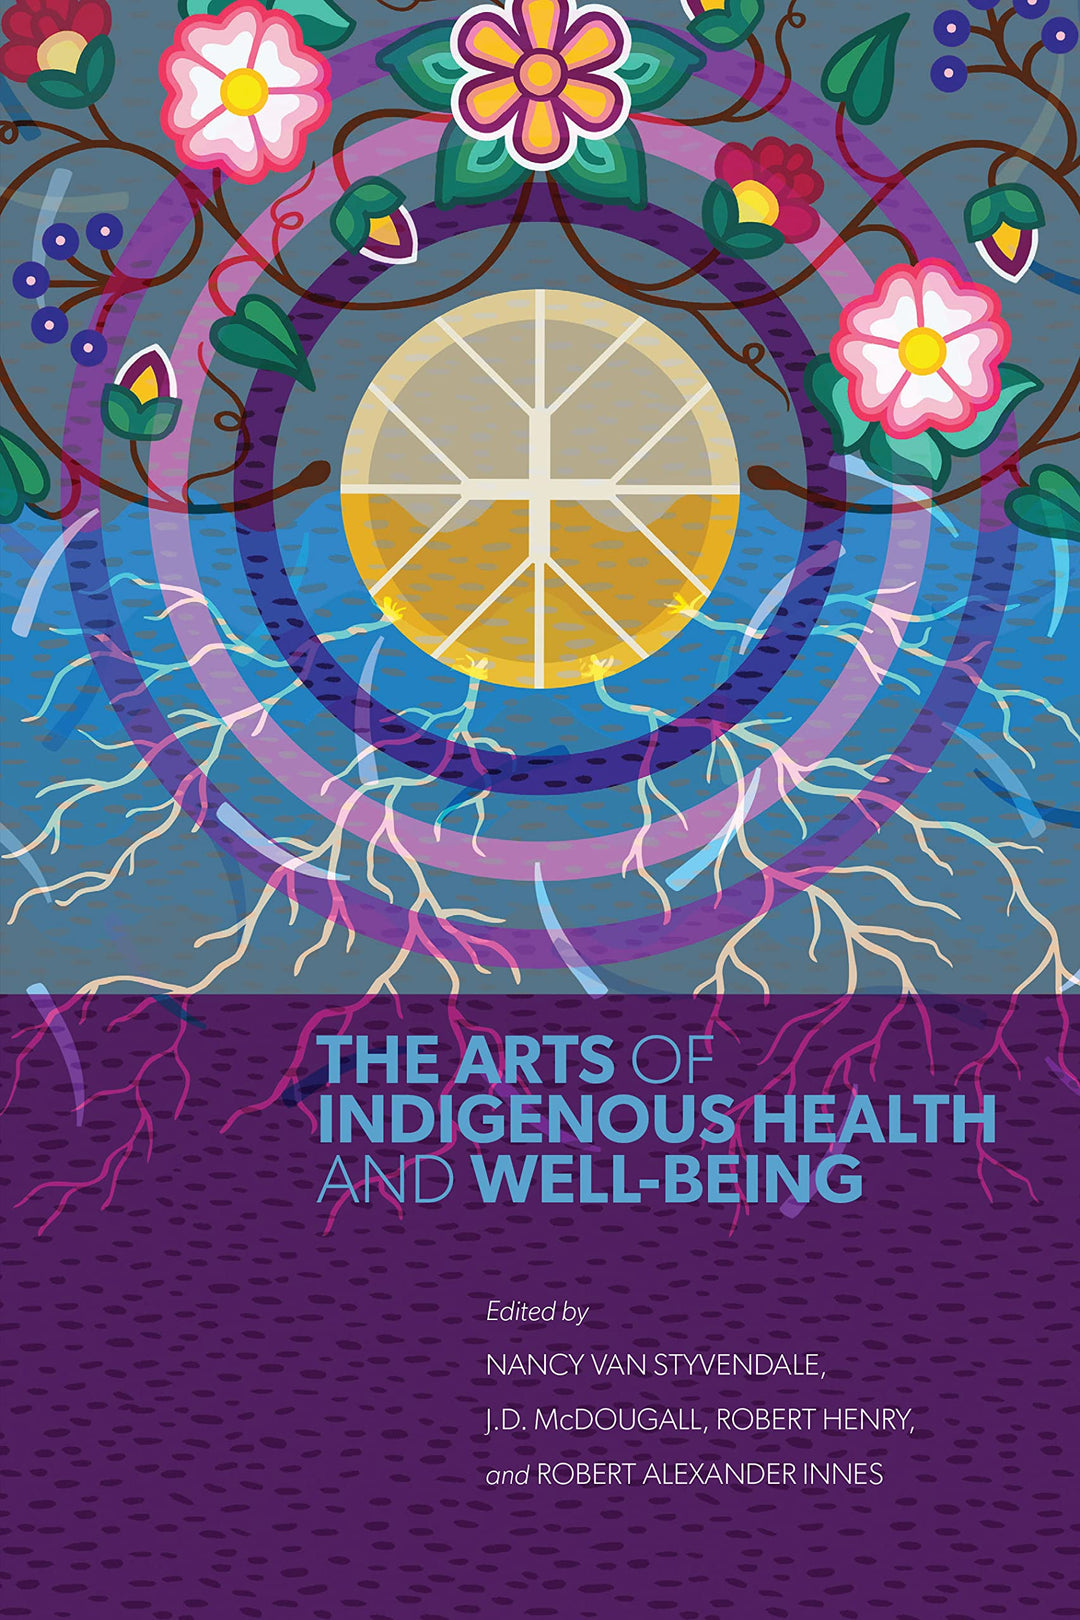 The Arts of Indigenous Health and Well-Being  edited by Nancy Van Styvendale et al.